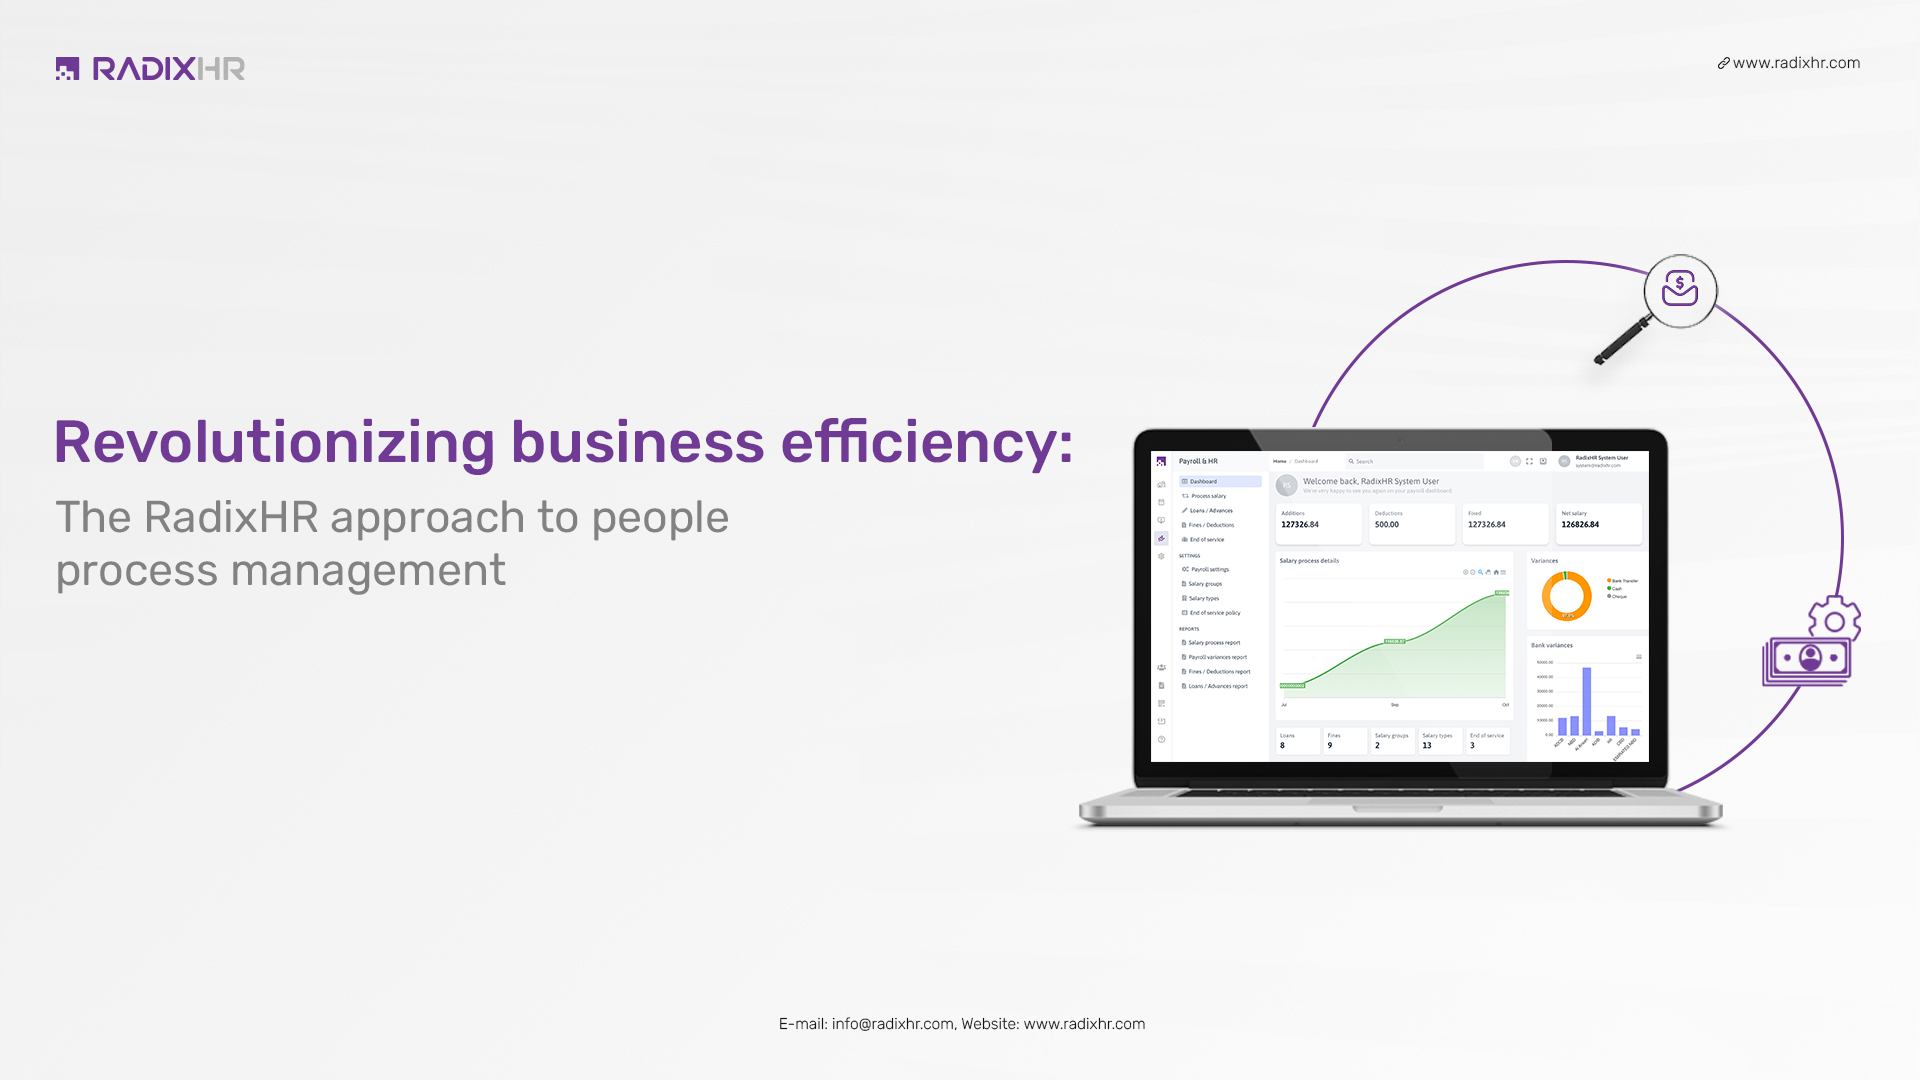 Revolutionizing business efficiency: The RadixHR approach to people process management